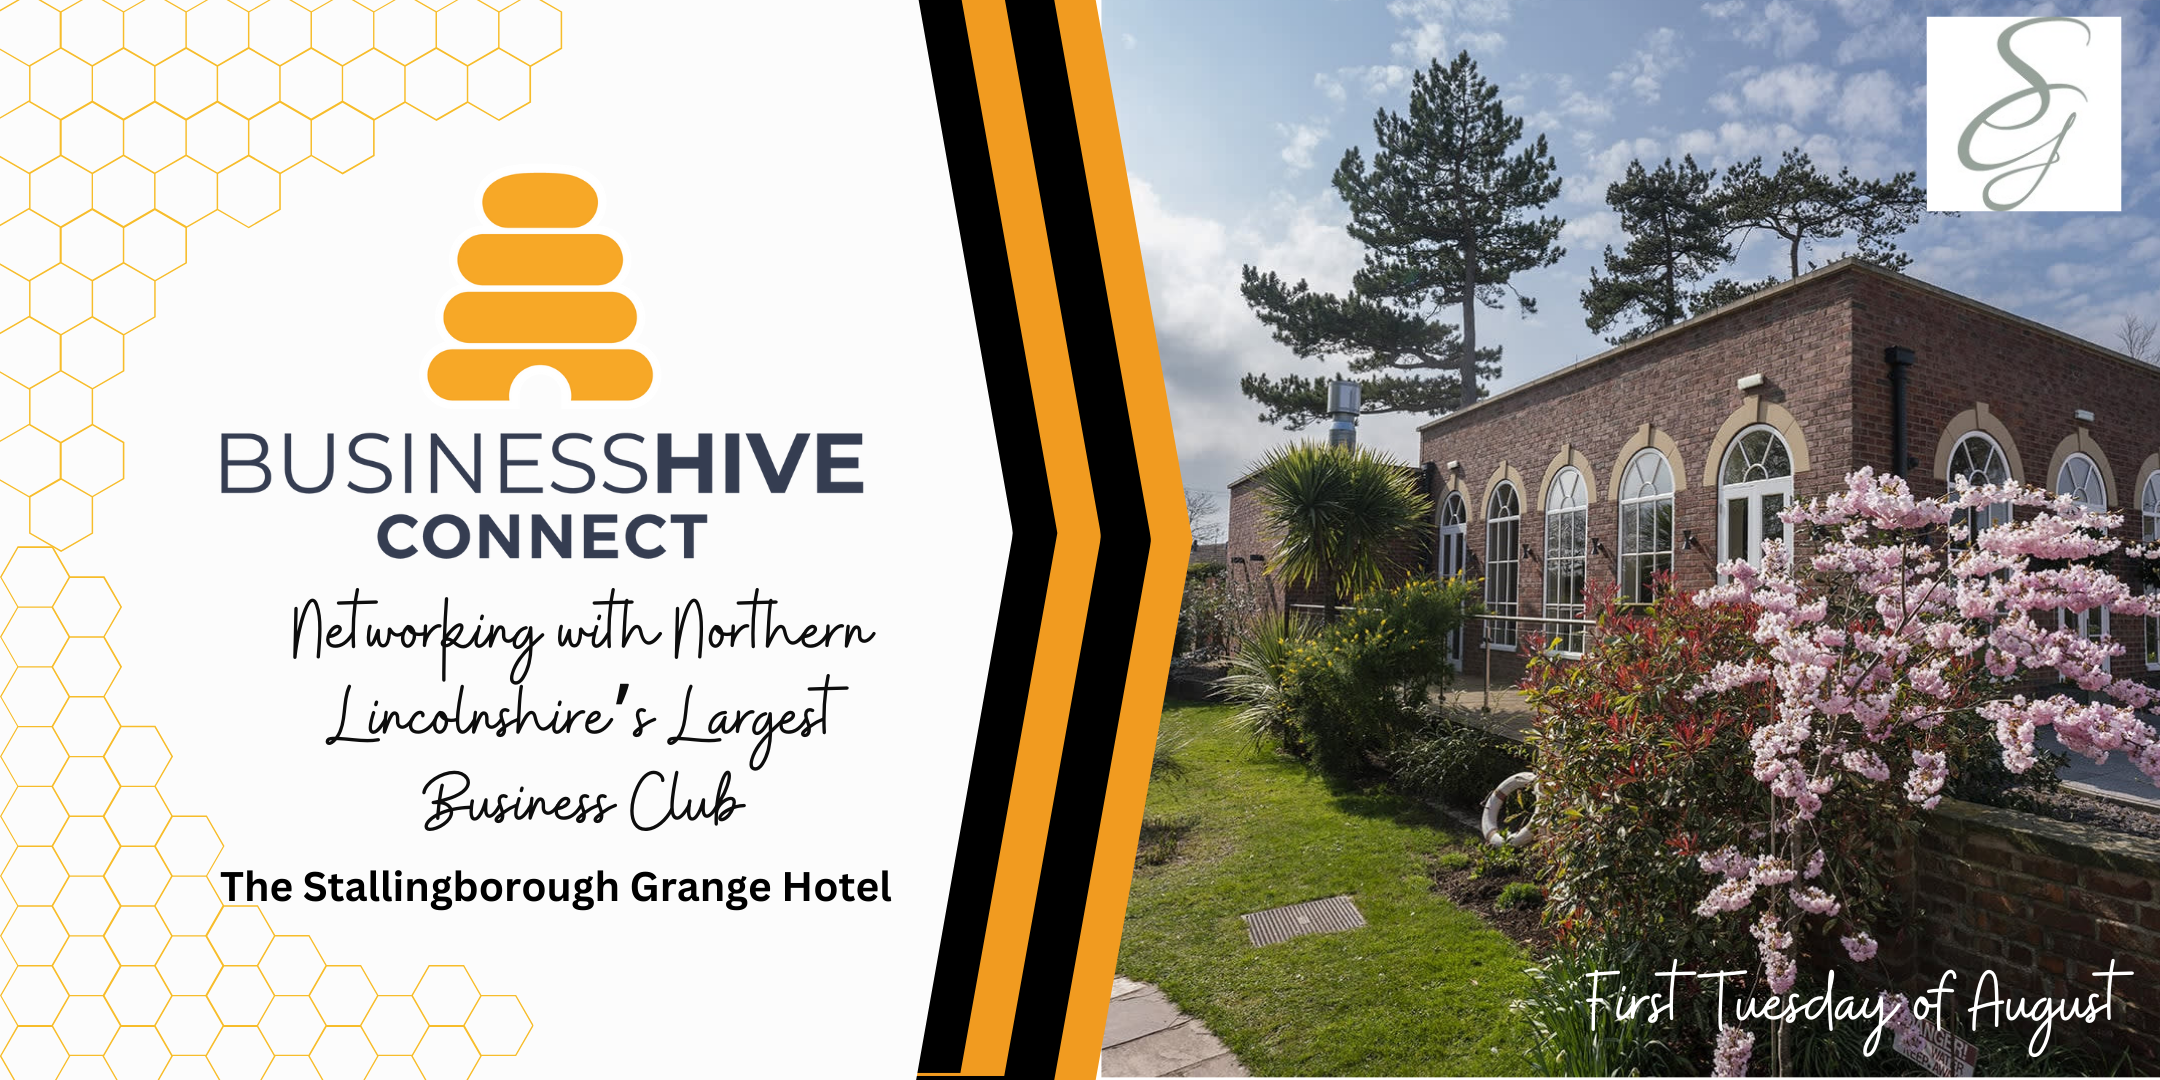 Flyer for the Business Hive Connect Summer BBQ networking event at The Stallingborough Grange Hotel, held on the first Tuesday of August.